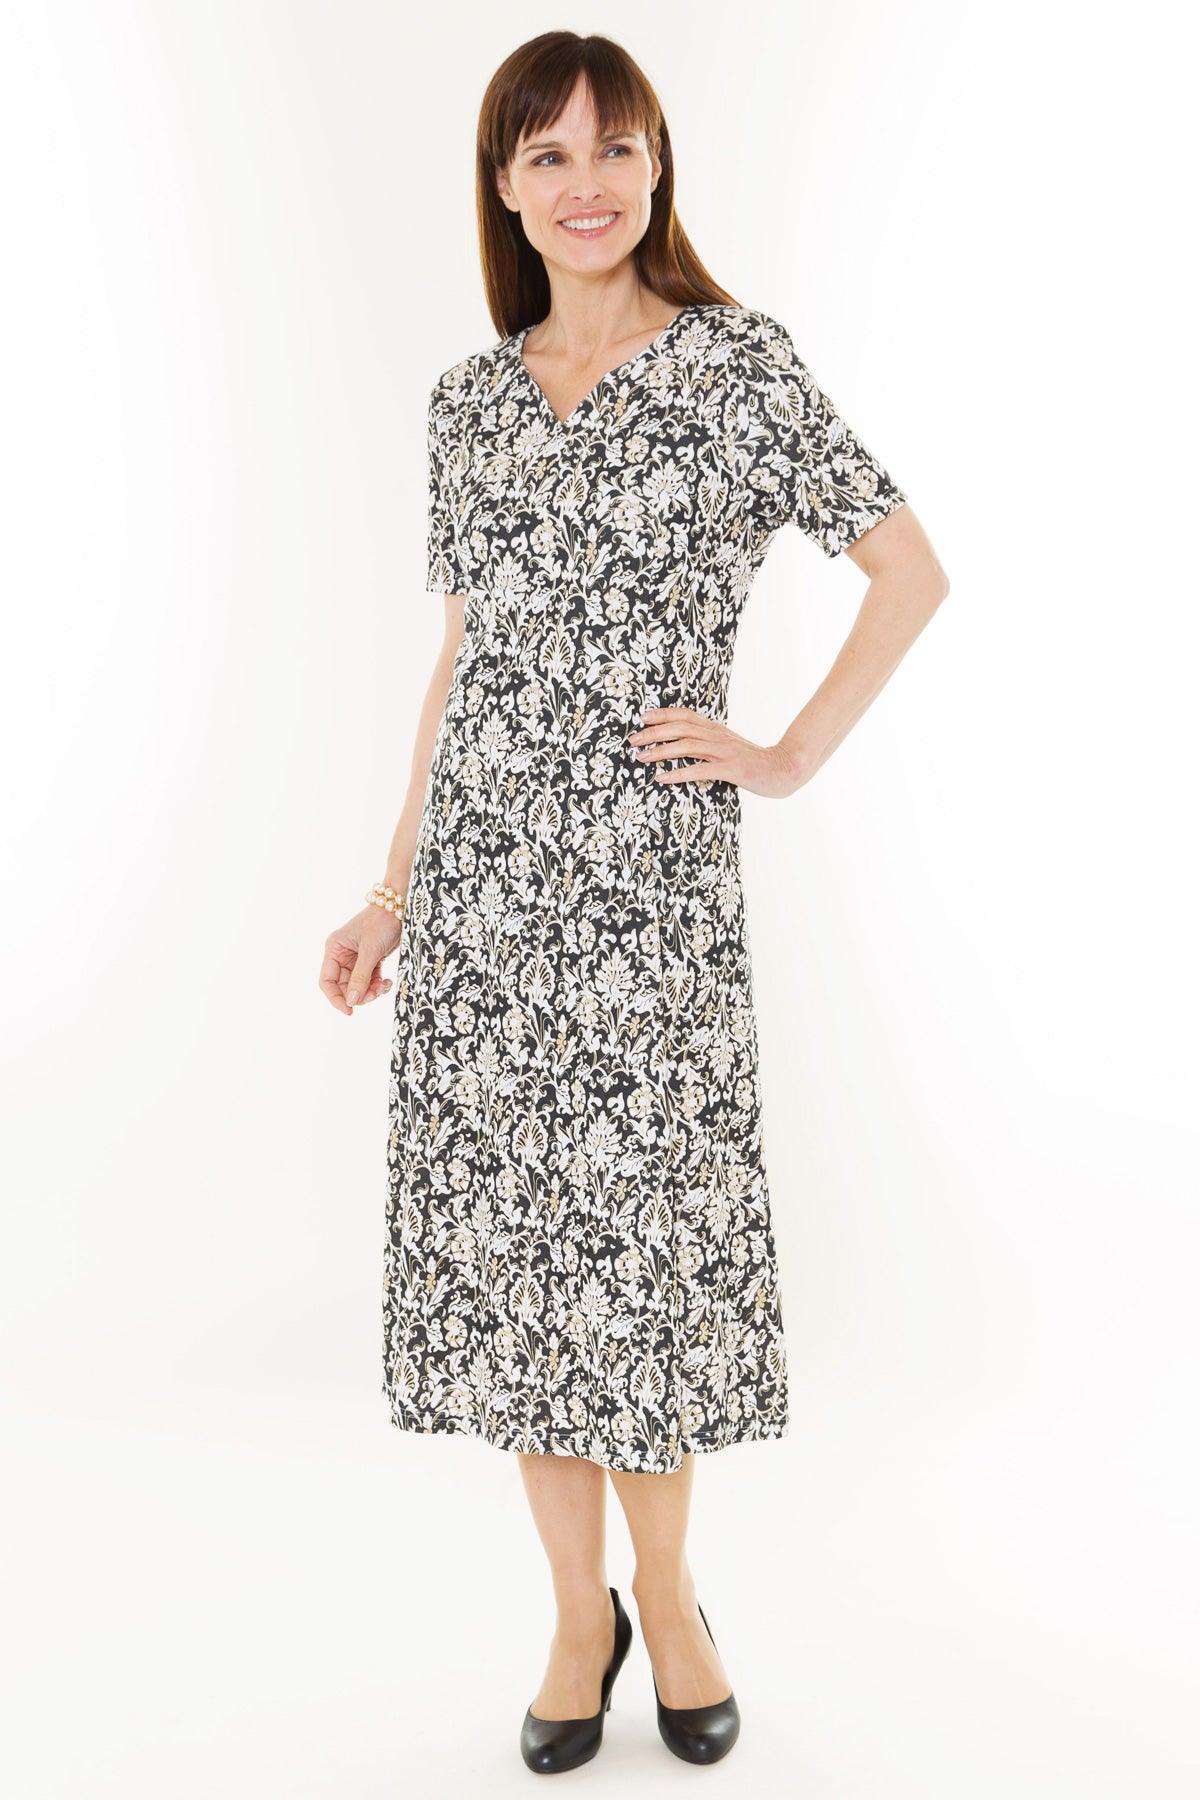 Betsy Thistle Dress - Carr & Westley